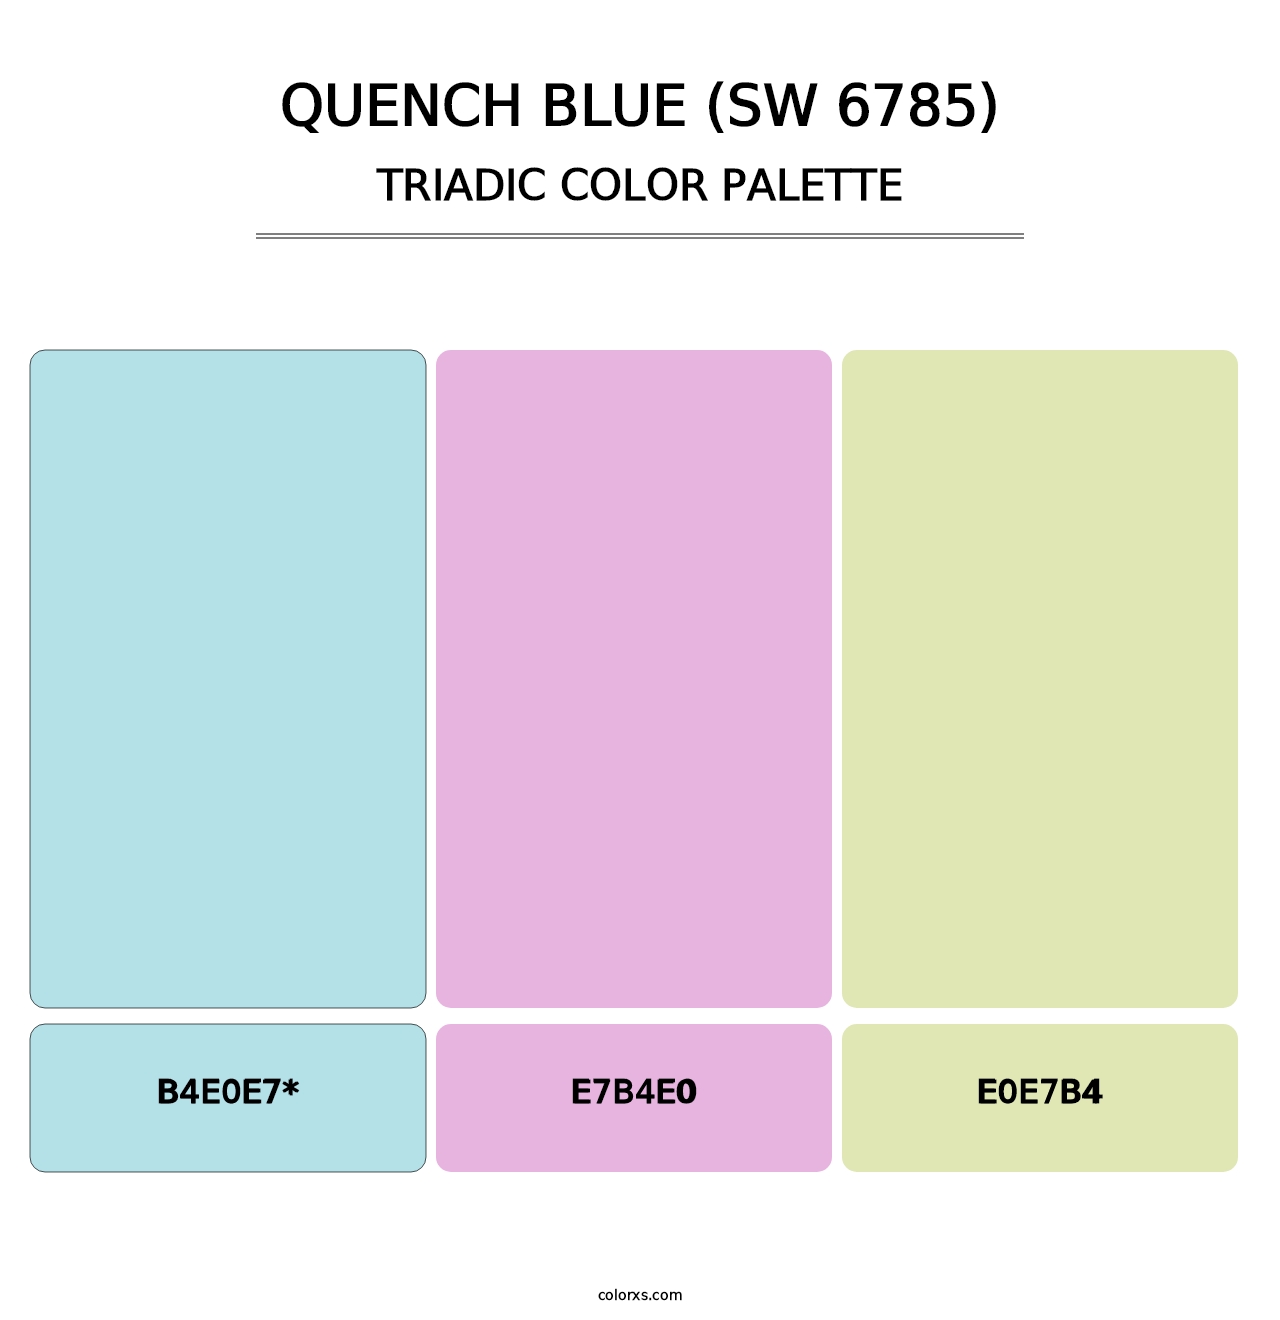 Quench Blue (SW 6785) - Triadic Color Palette